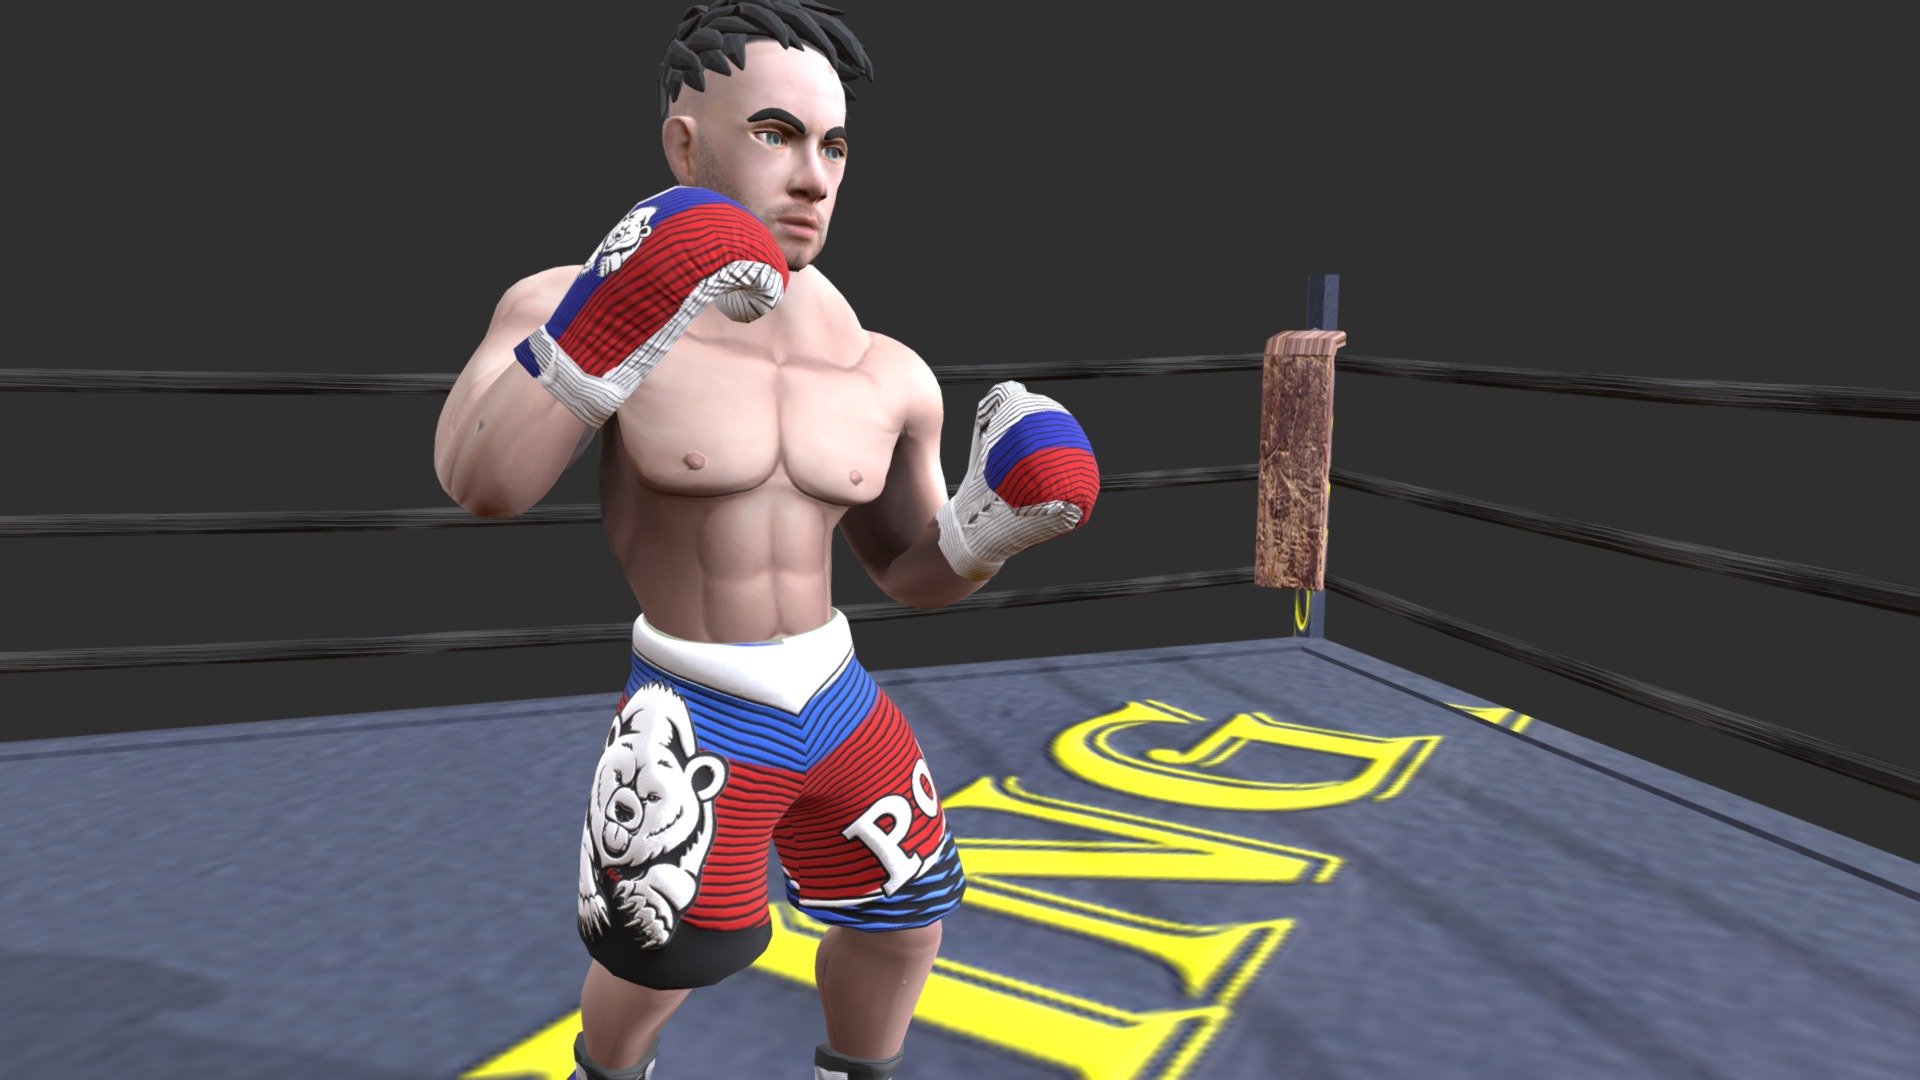 A boxer character with four basic punches and facial movements made using blendshapes 3d model